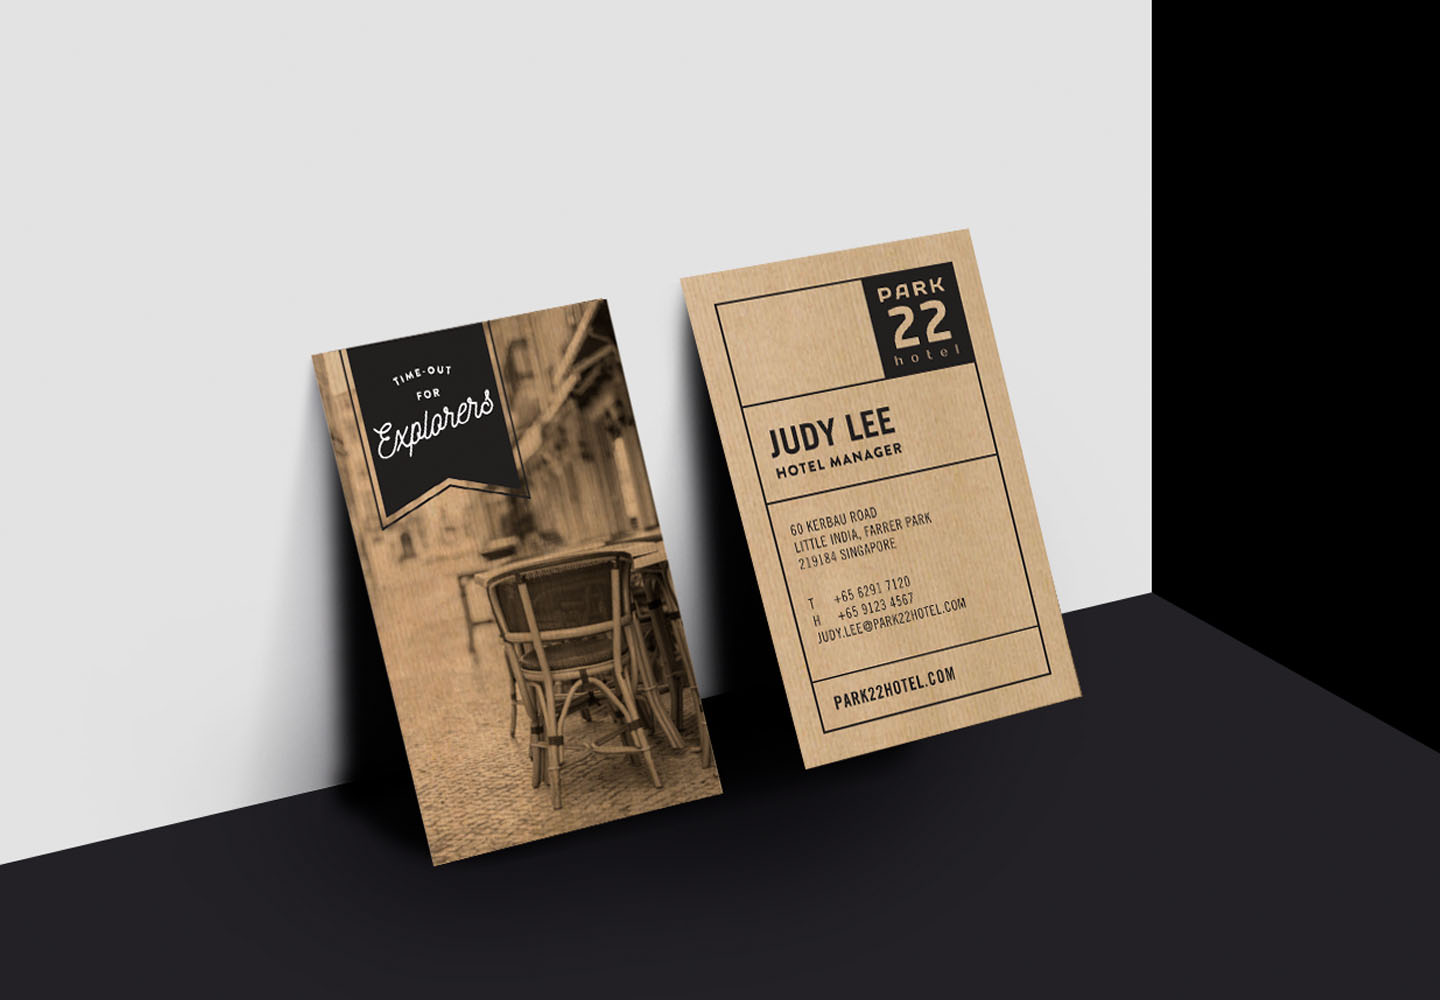 Brand Consultancy in Hospitality Industry. Poster Design for Park 22